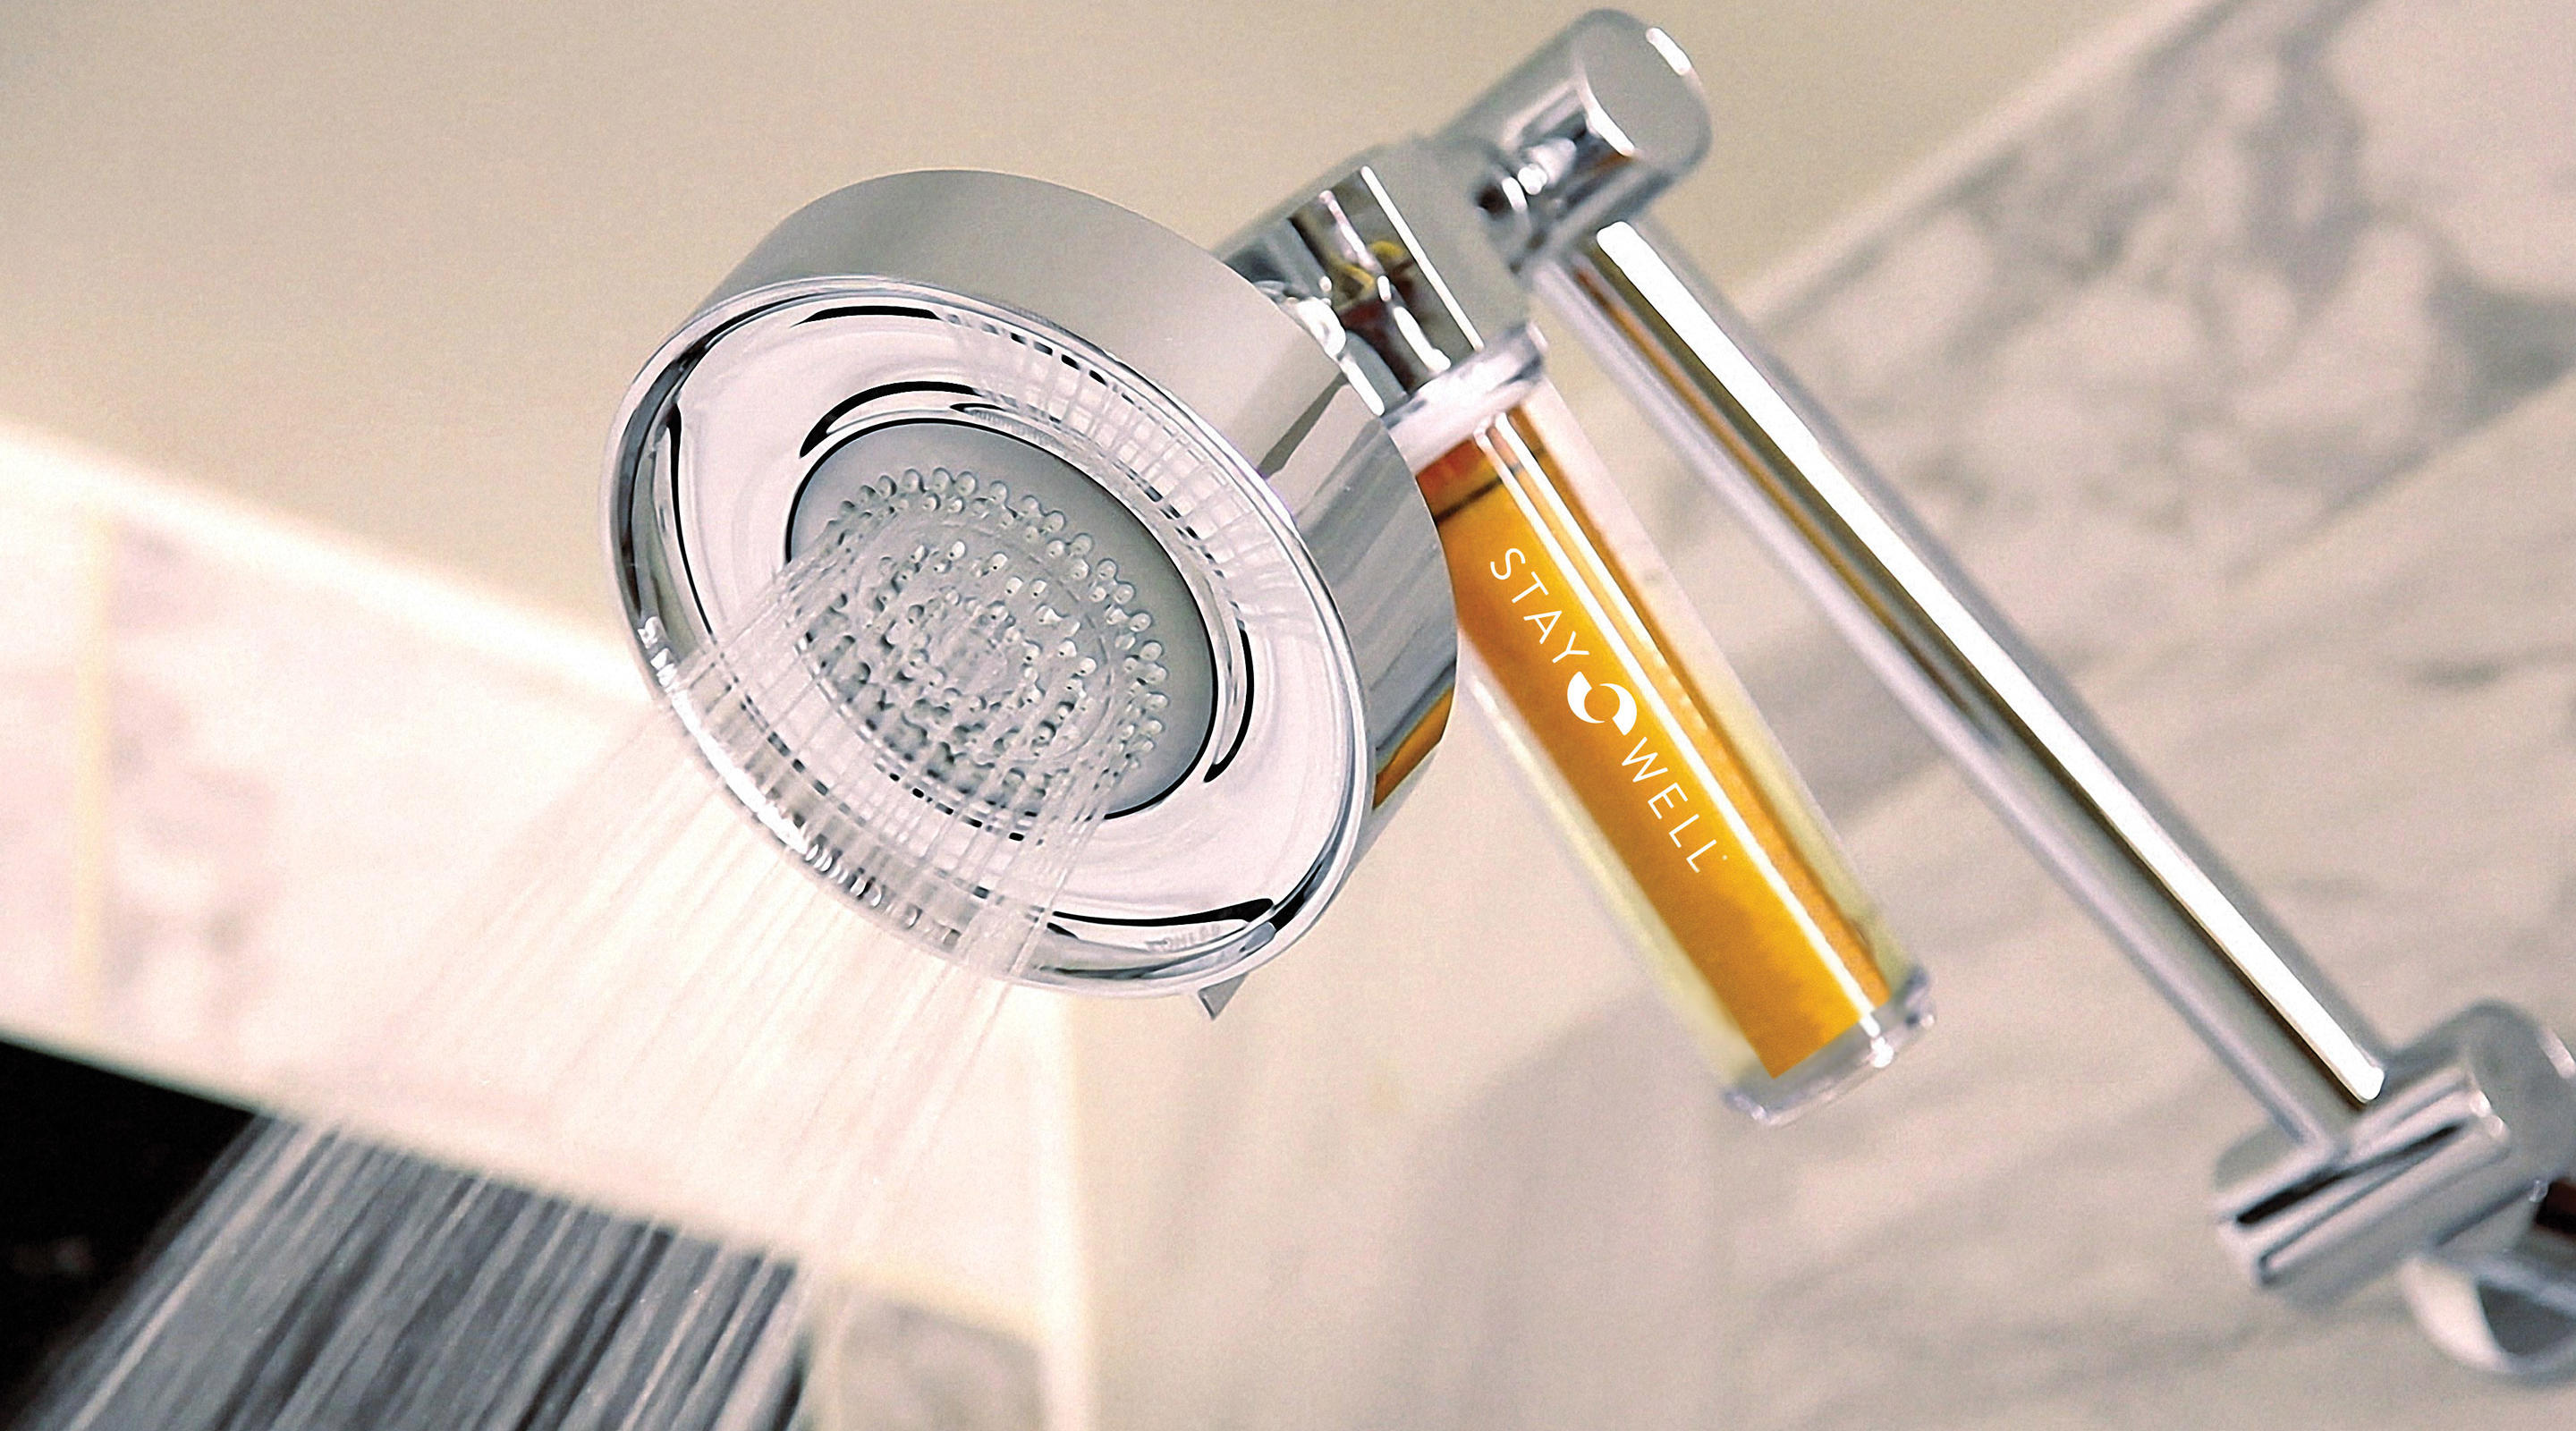 Shower infuser inside Stay Well bathrooms.